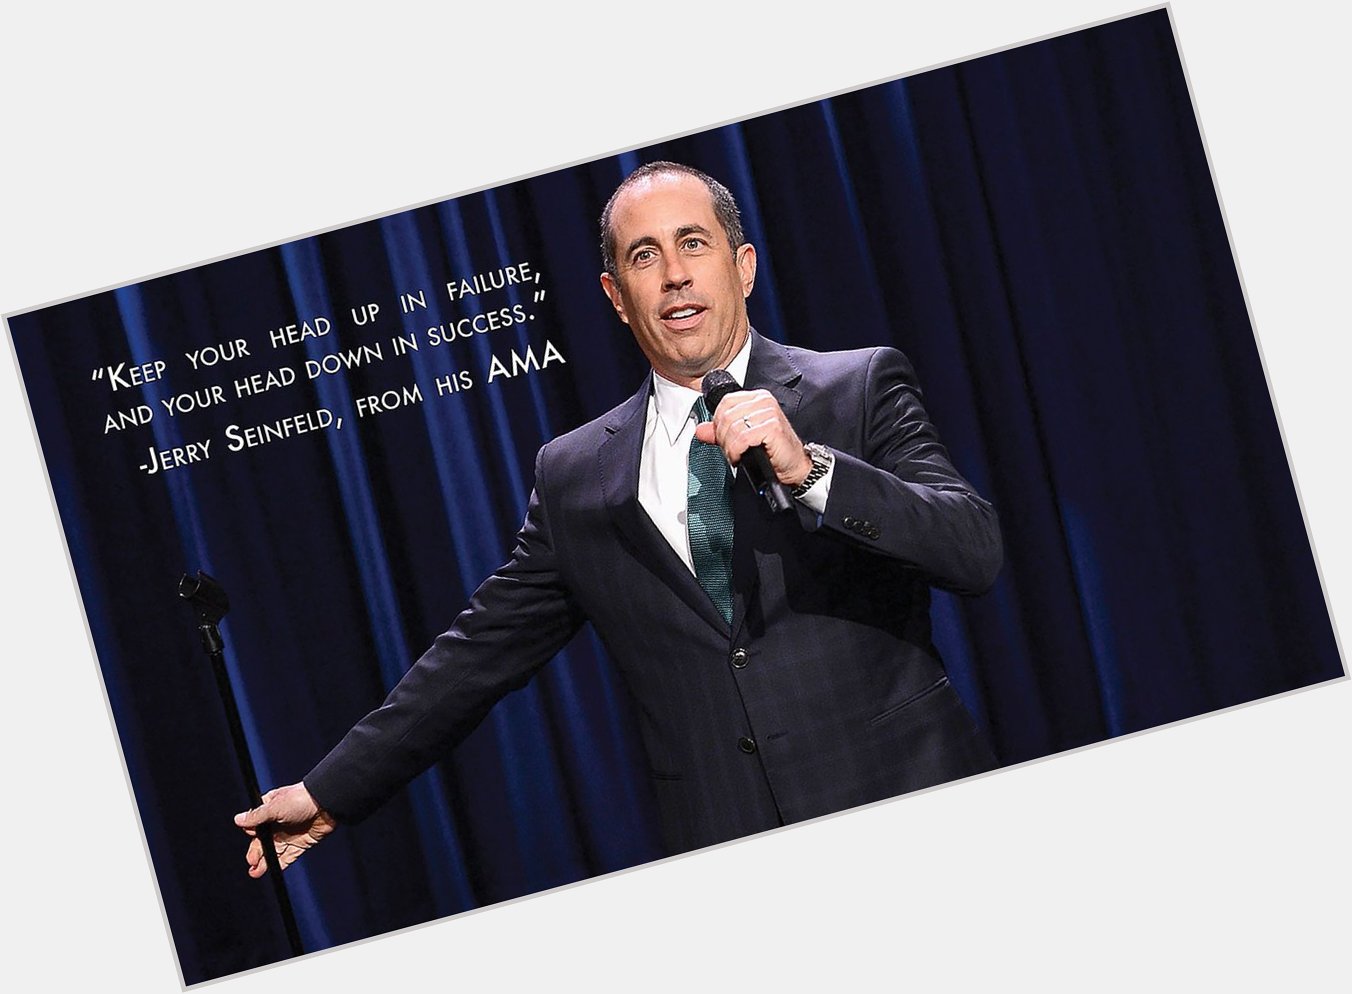 Happy 61st birthday Jerry Seinfeld! We can never get enough of your wit and your ideas. Cheers. 